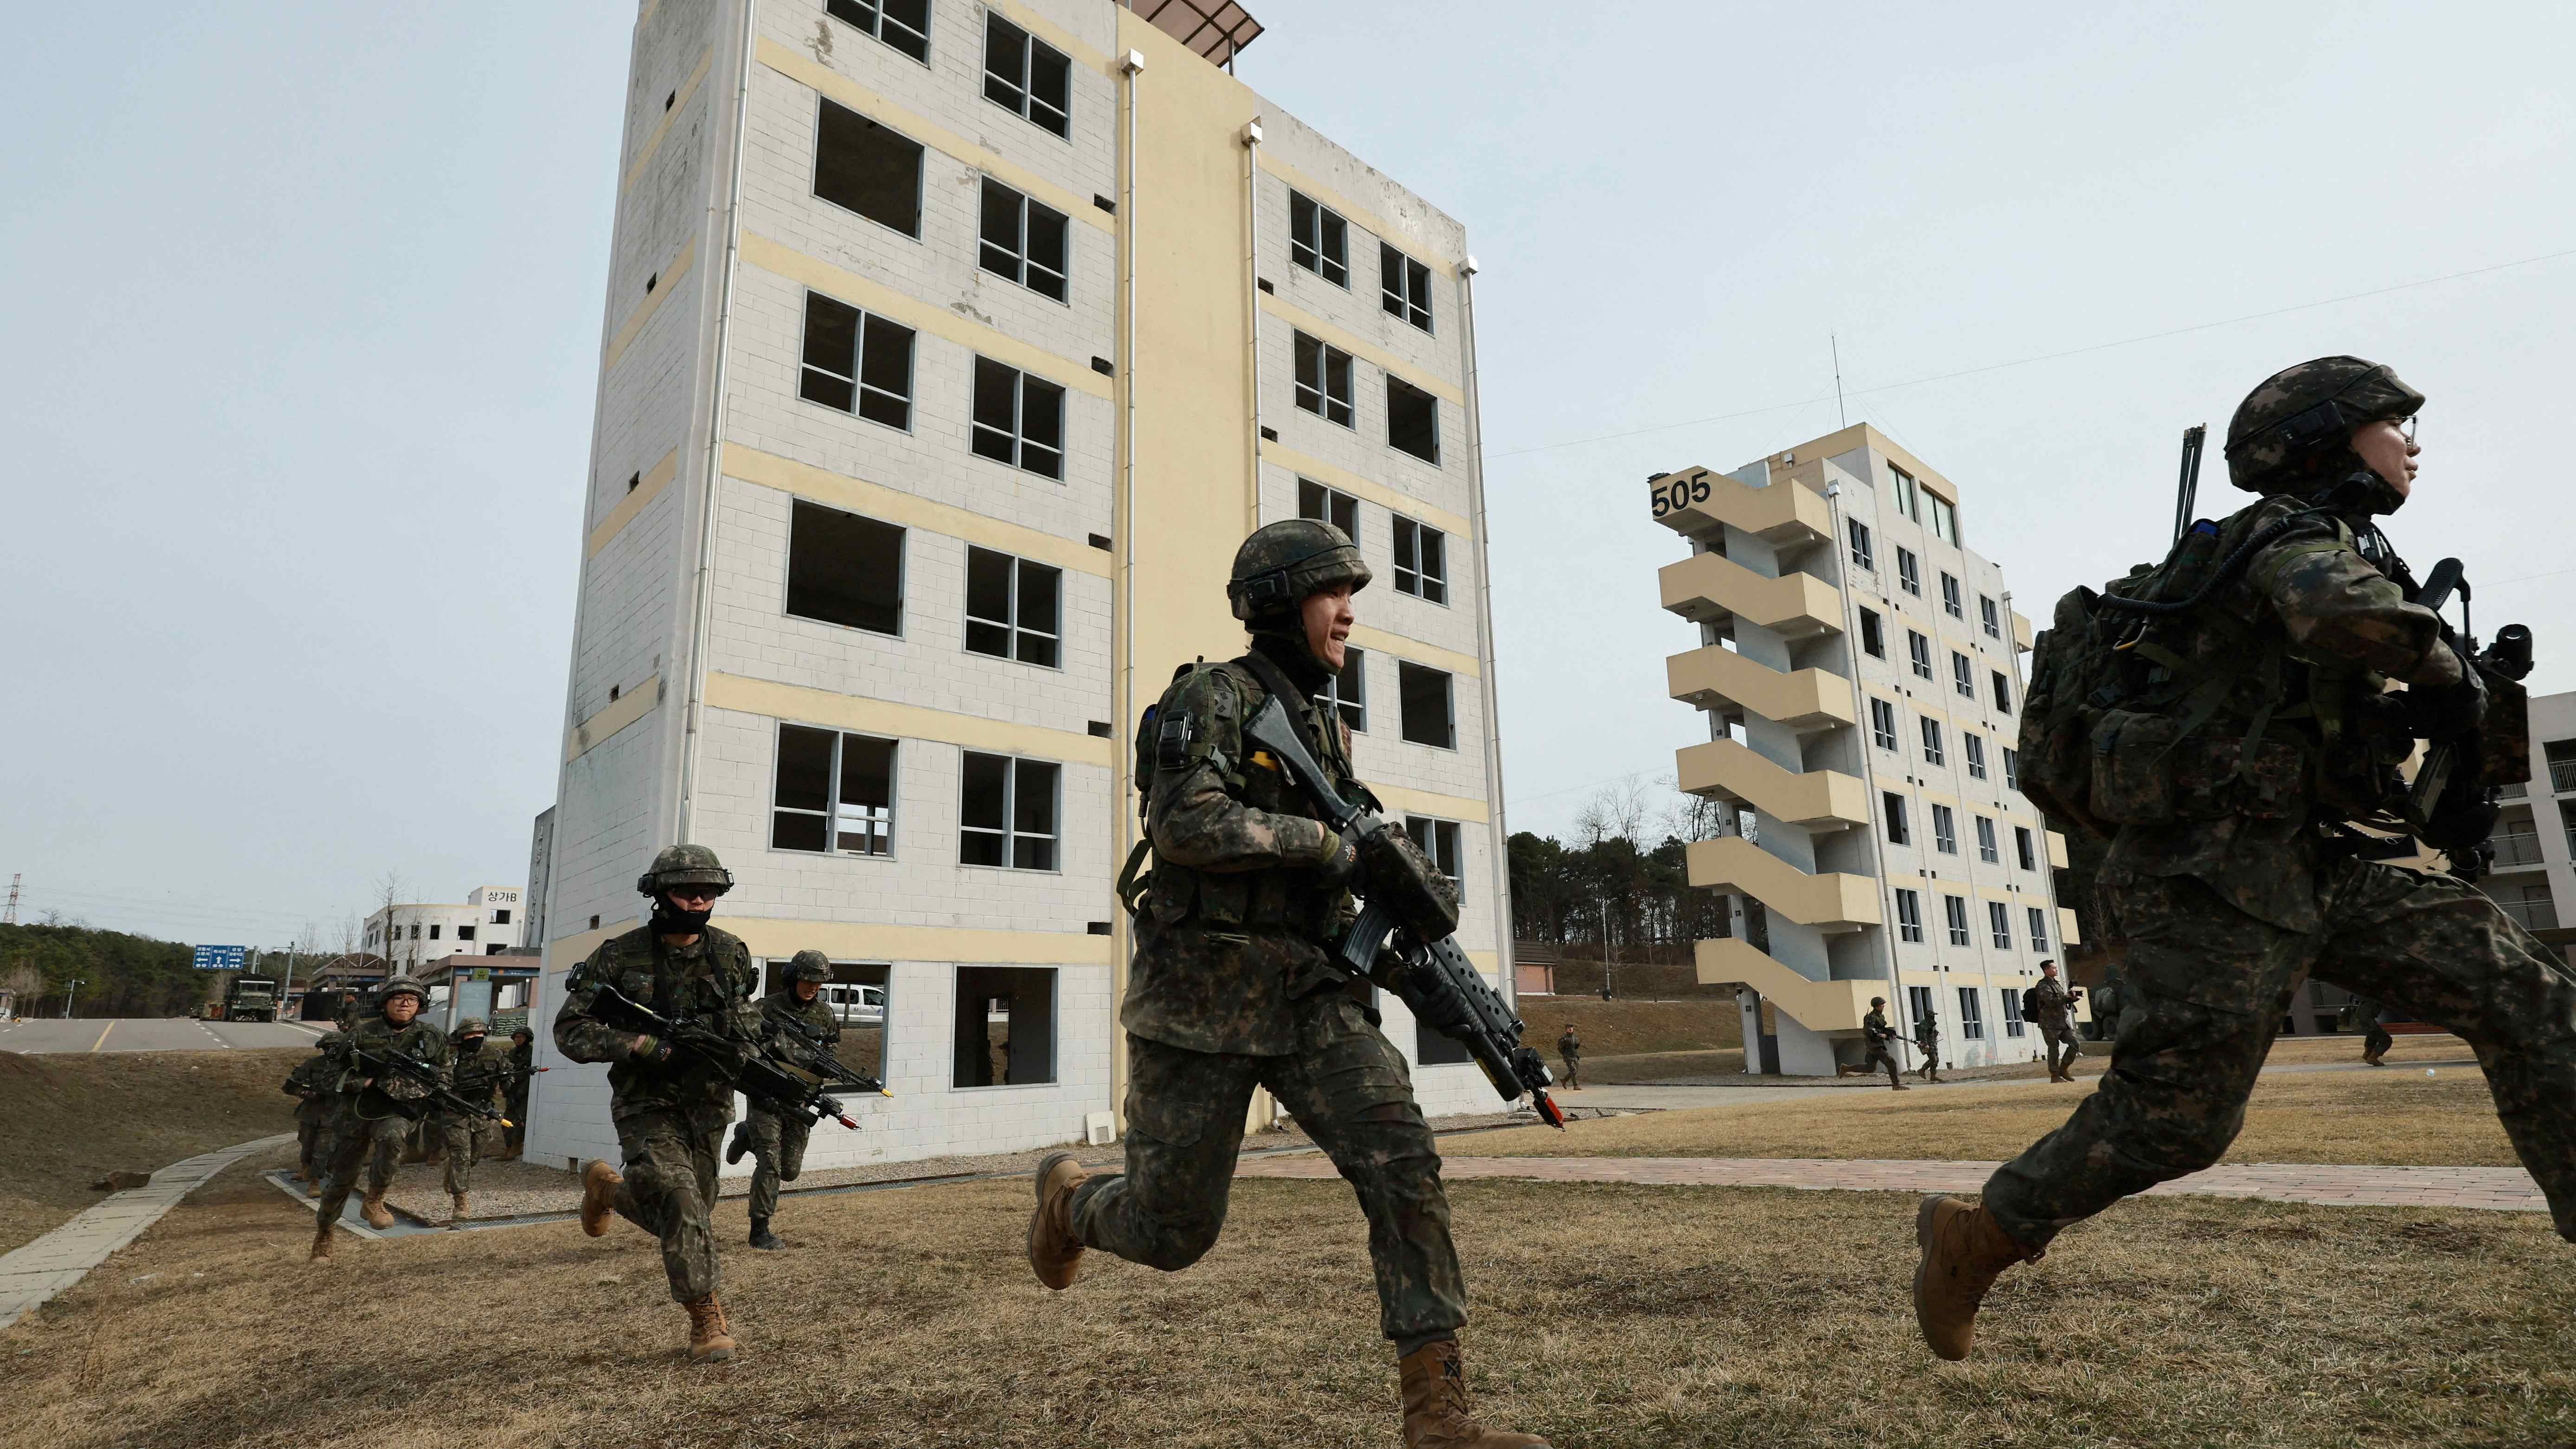 South Korean soldiers take part in a joint military drill which is a part of the Freedom Shield joint military exercise between South Korea and U.S., at a military training field near the demilitarized zone separating the two Koreas in Paju, South Korea, March 16, 2023. Credit: Reuters Photo